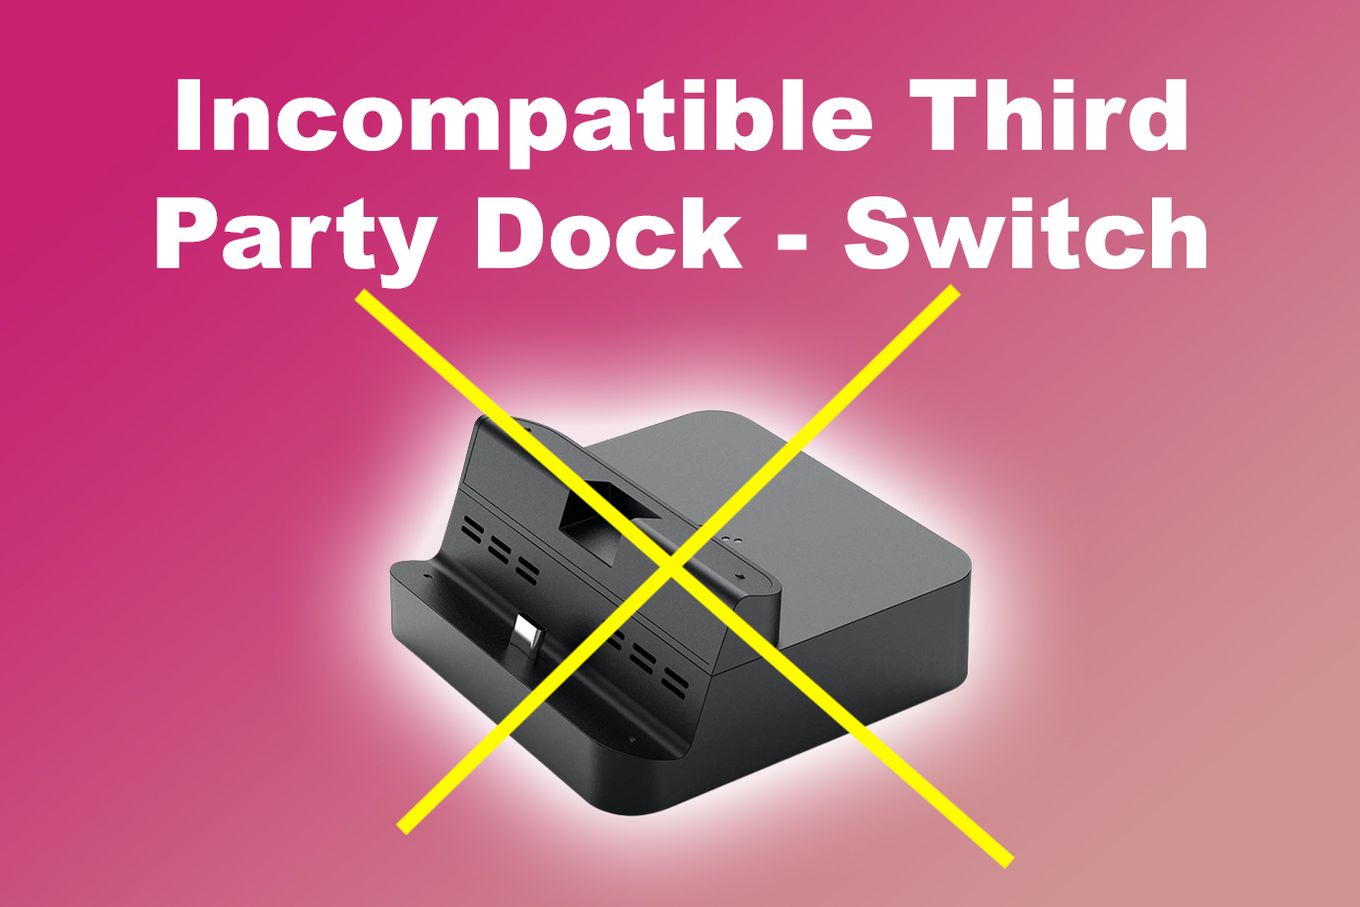 Incompatible Third Party Dock - Nintendo Switch